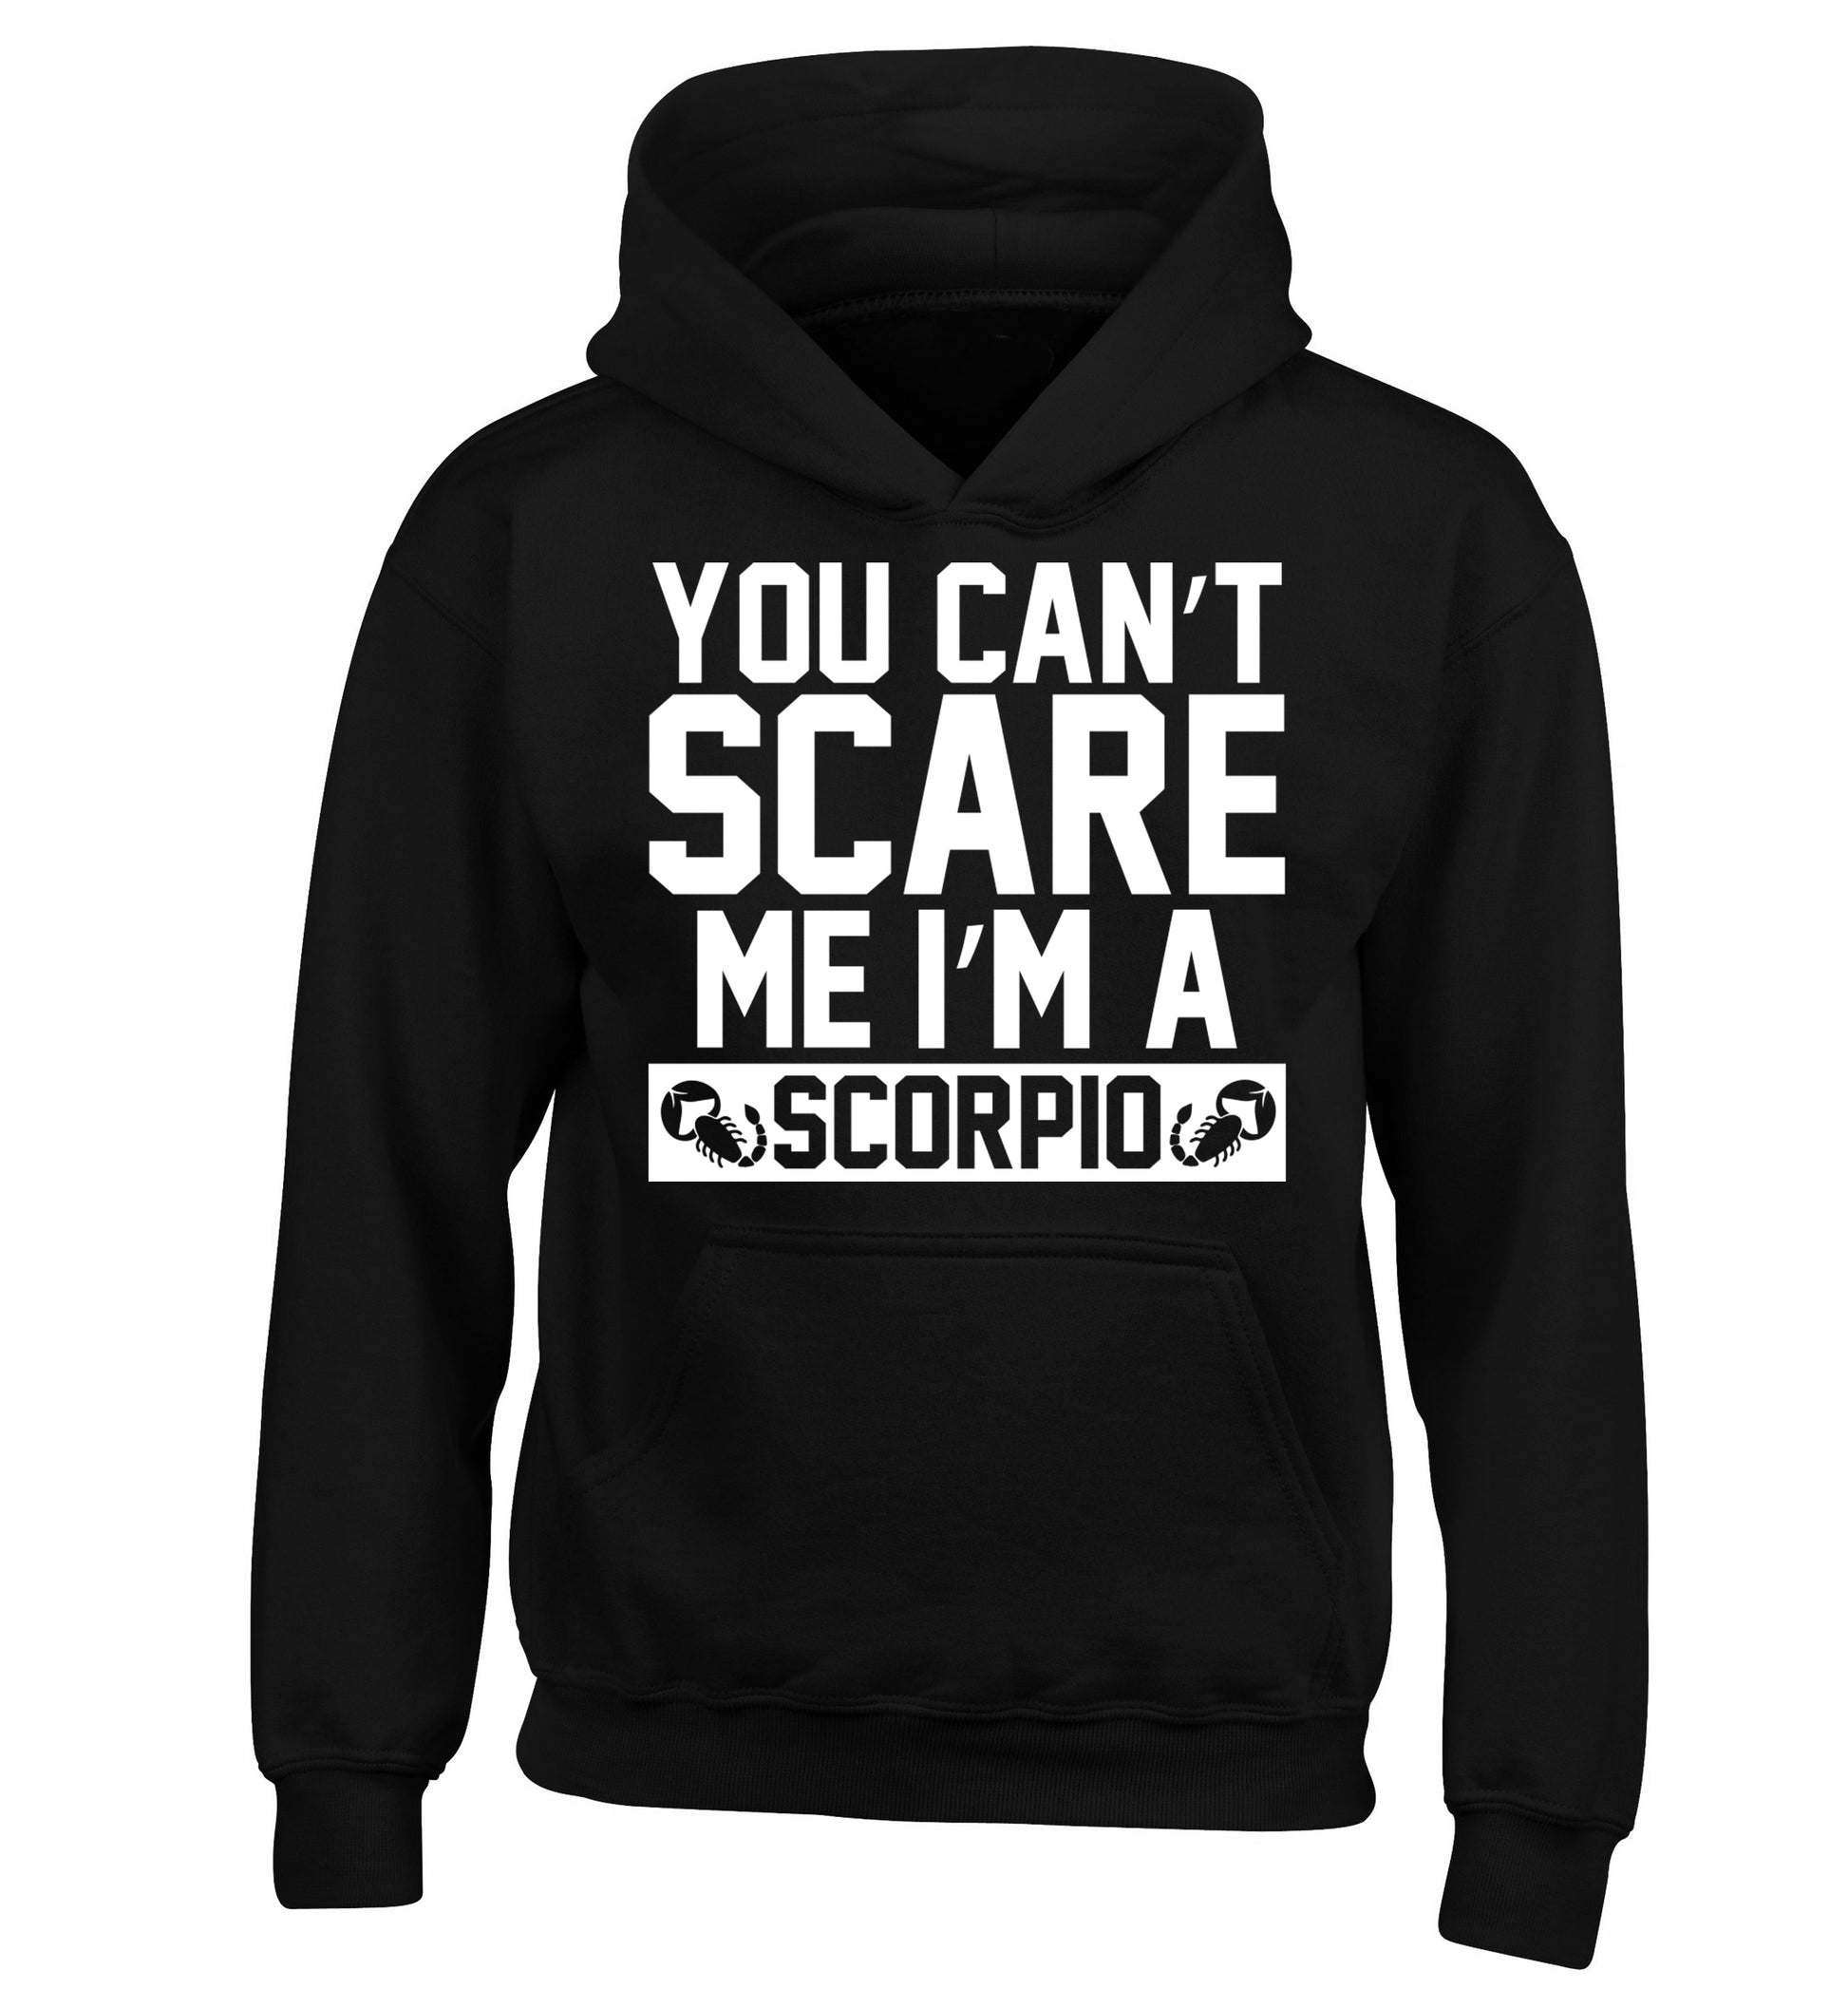 You can't scare me I'm a scorpio children's black hoodie 12-13 Years